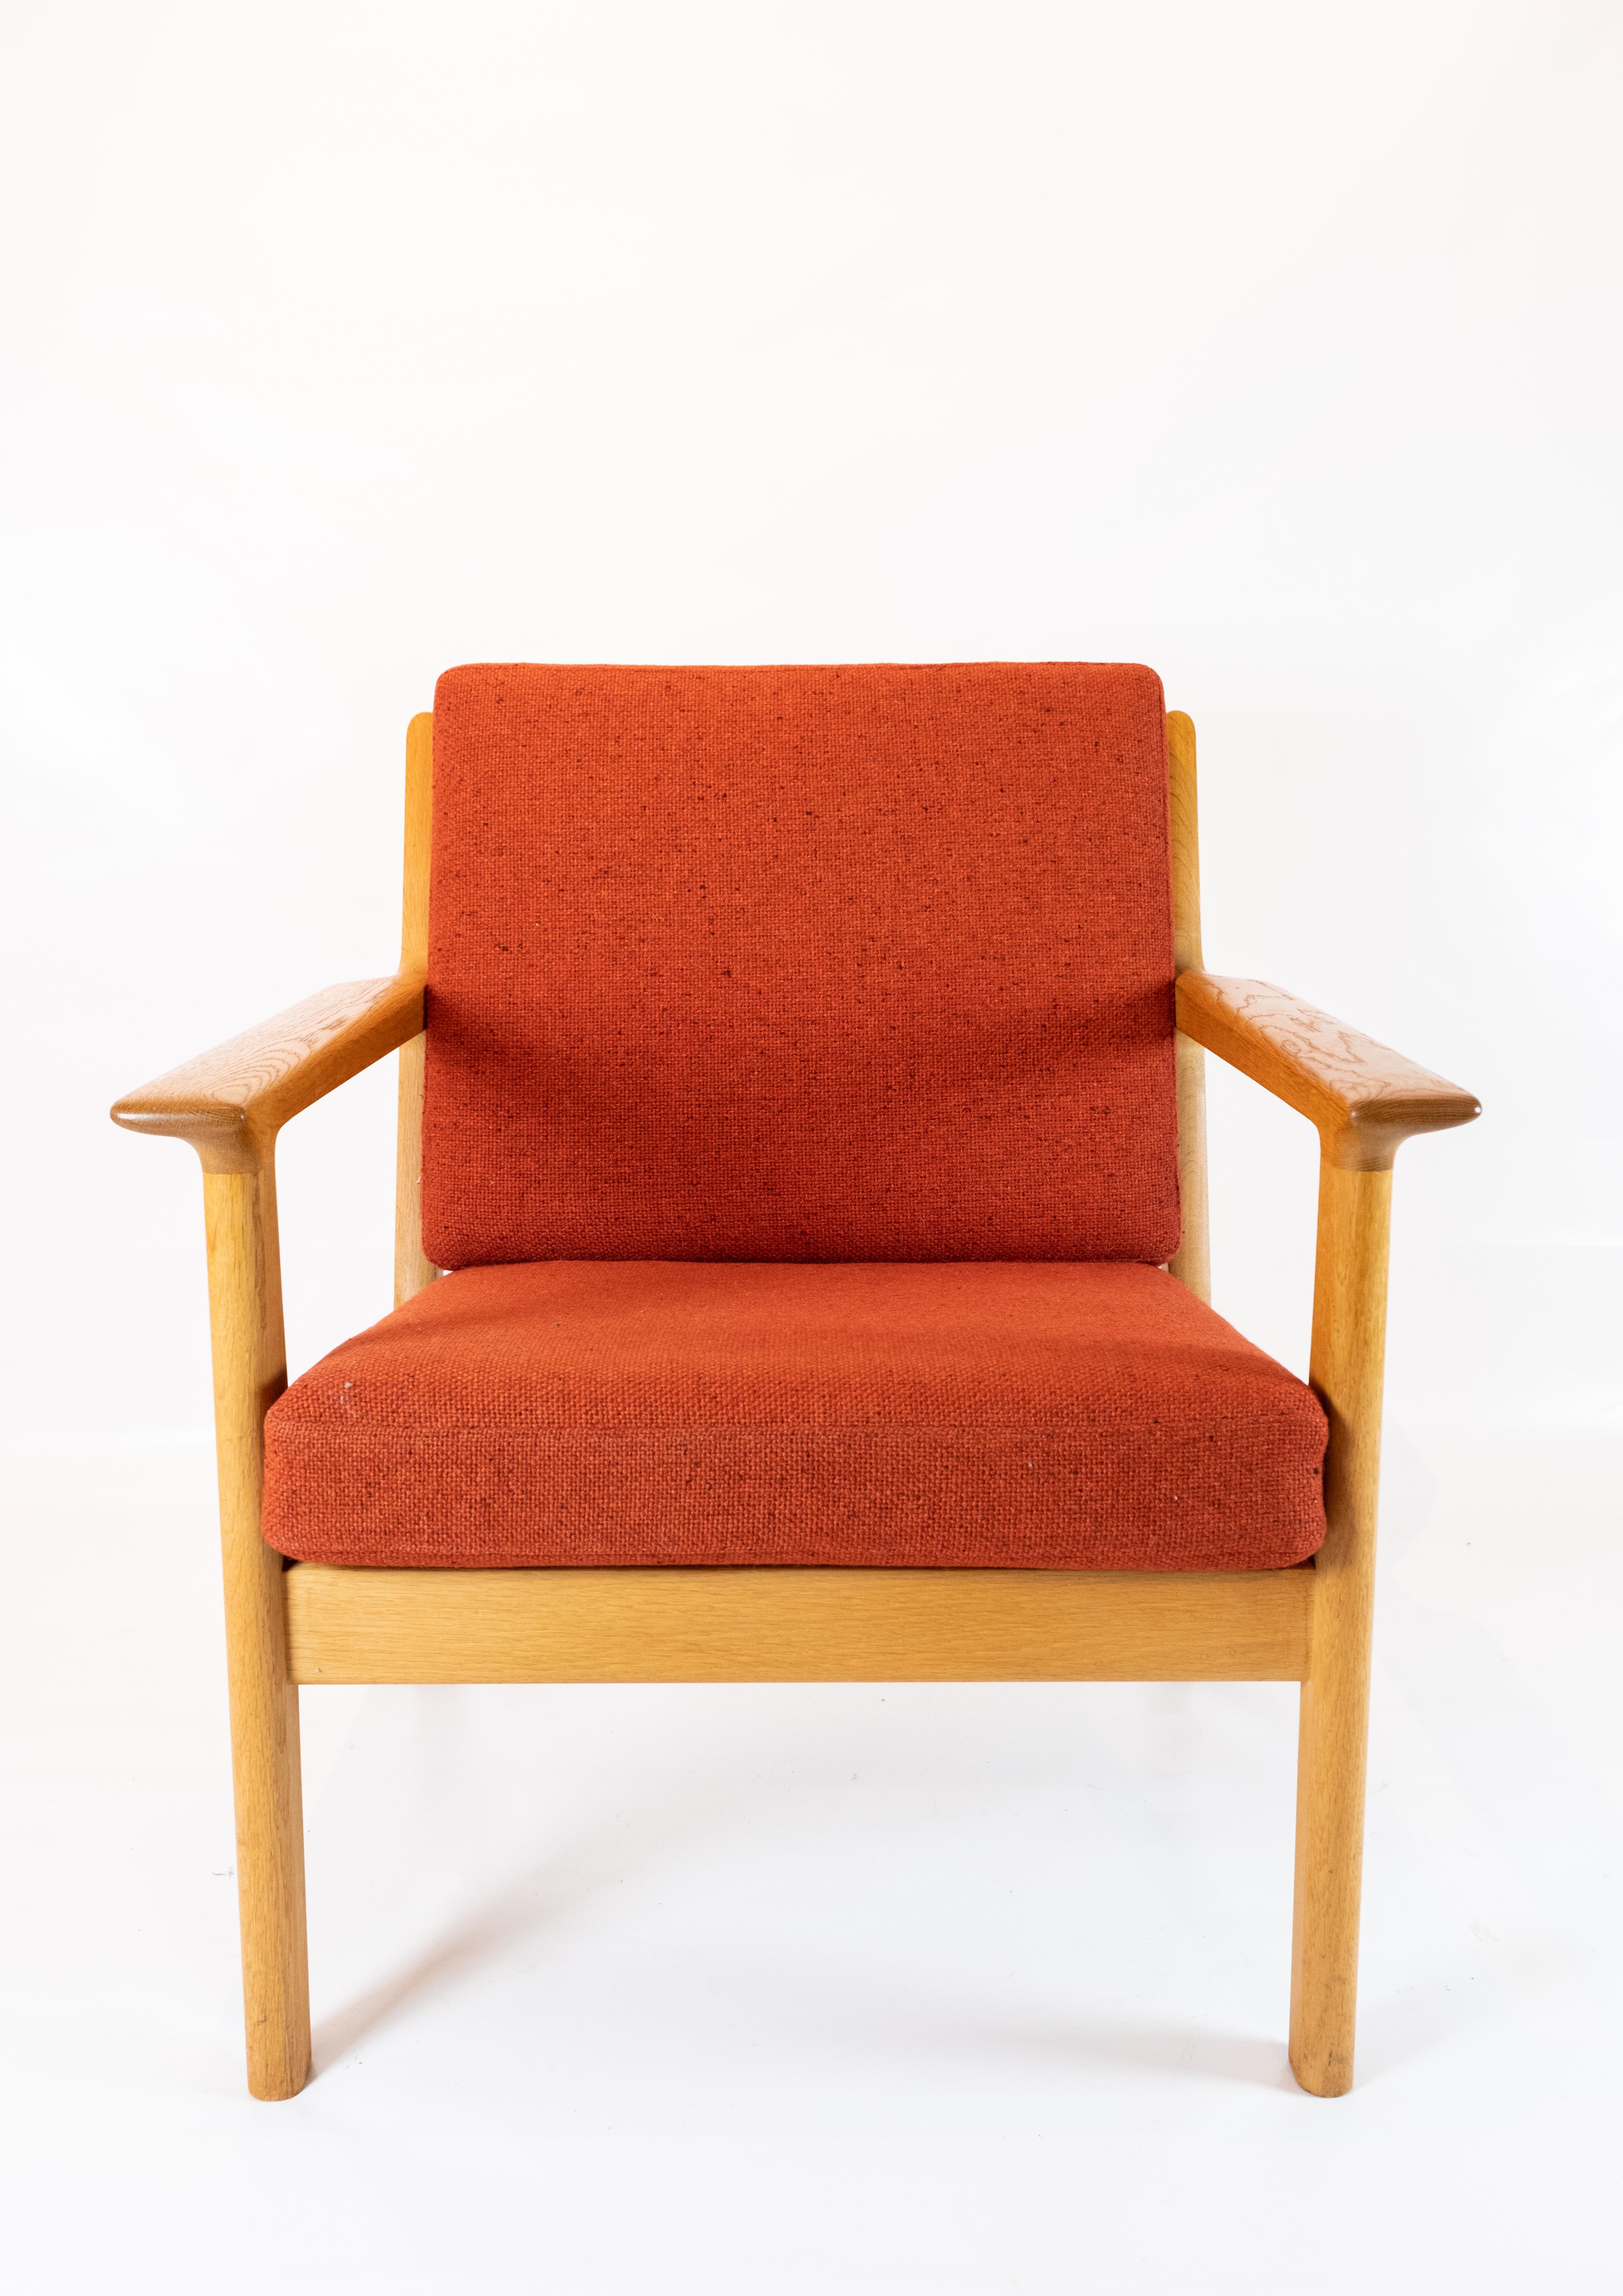 This easy chair, designed by the iconic Hans J. Wegner and crafted by GETAMA in the 1960s, epitomizes the timeless appeal of Scandinavian design. Constructed from solid oak and upholstered in a striking red wool fabric, it seamlessly blends comfort